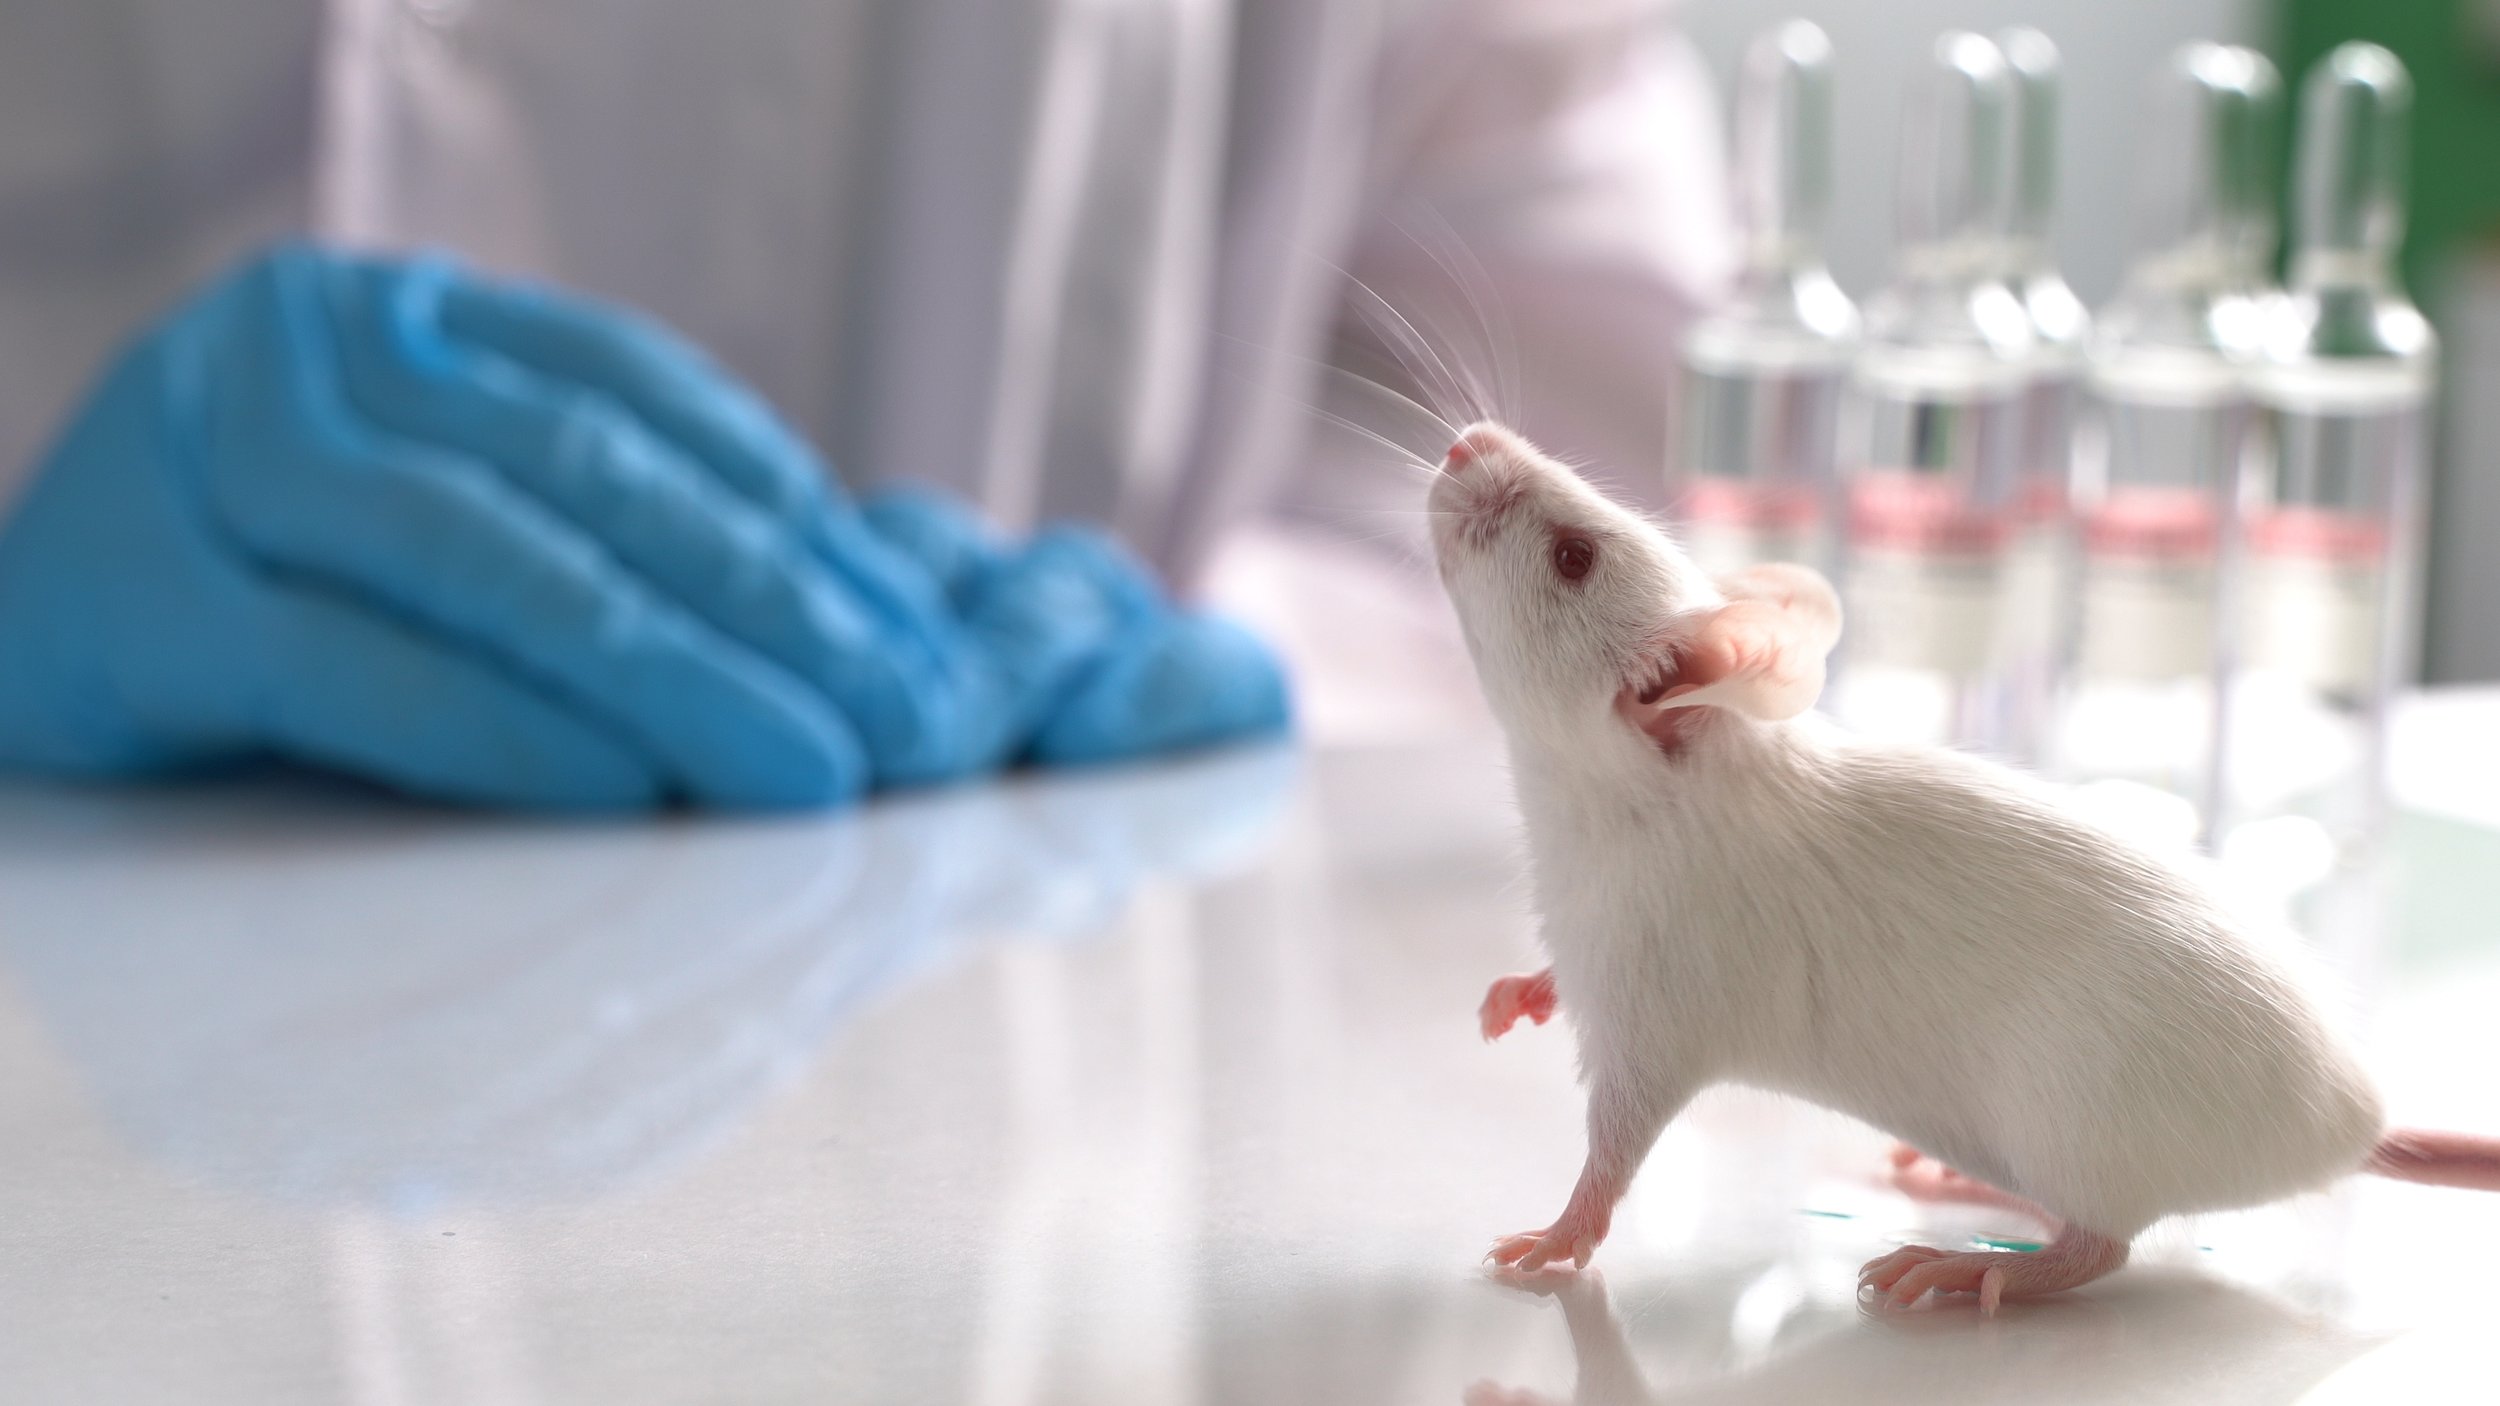 It's time researchers start focusing on better alternatives to animal  testing rather than discuss its ethics — Methuselah Foundation